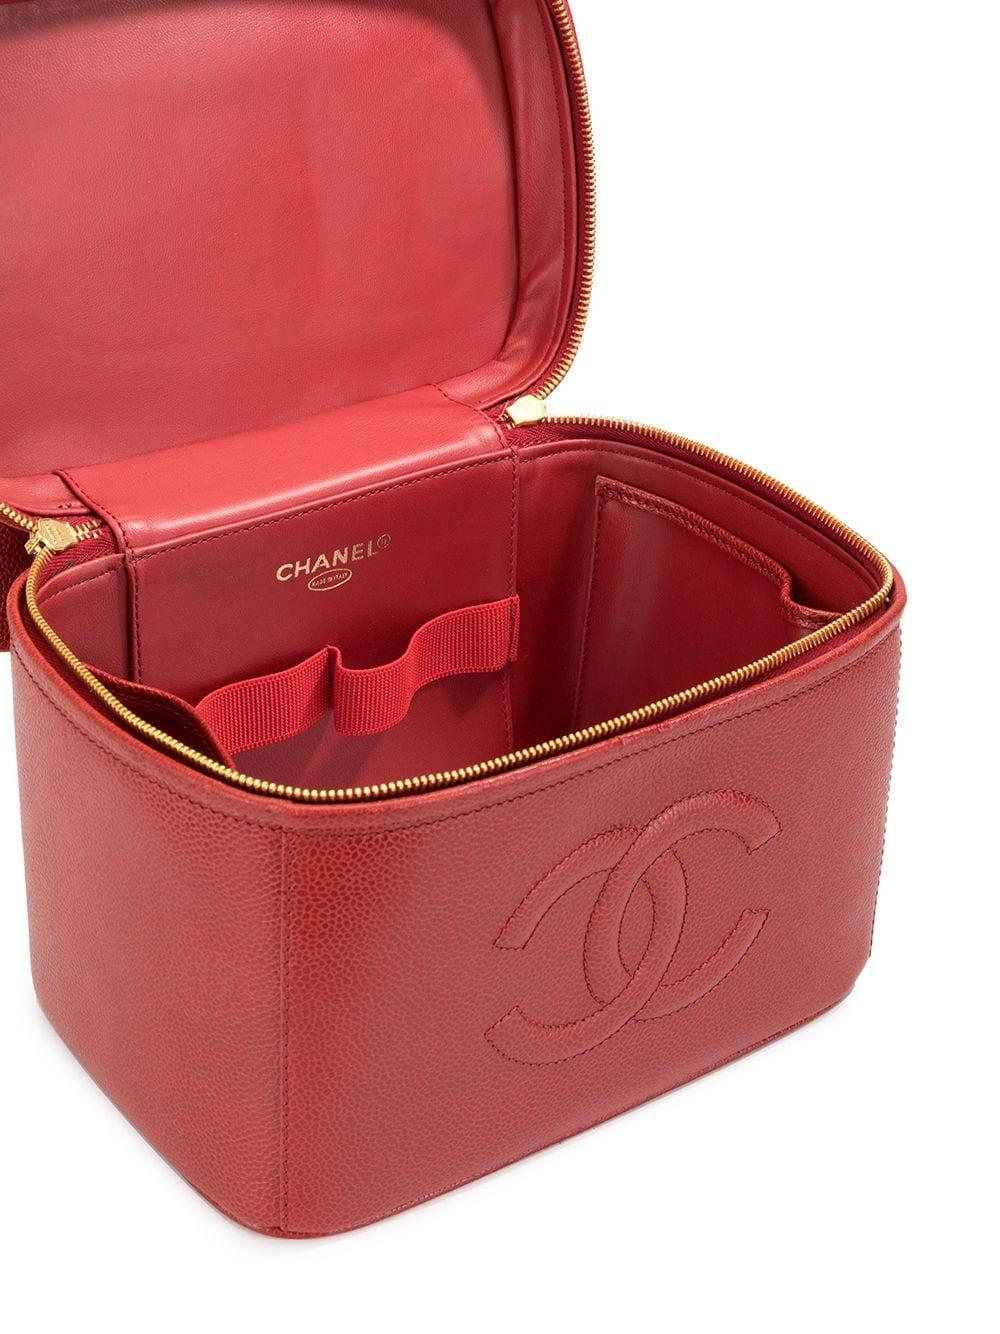 Chanel 1998 Red Vintage CC Travel Vanity Train Case Shoulder Crossbody Bag In Good Condition For Sale In Miami, FL